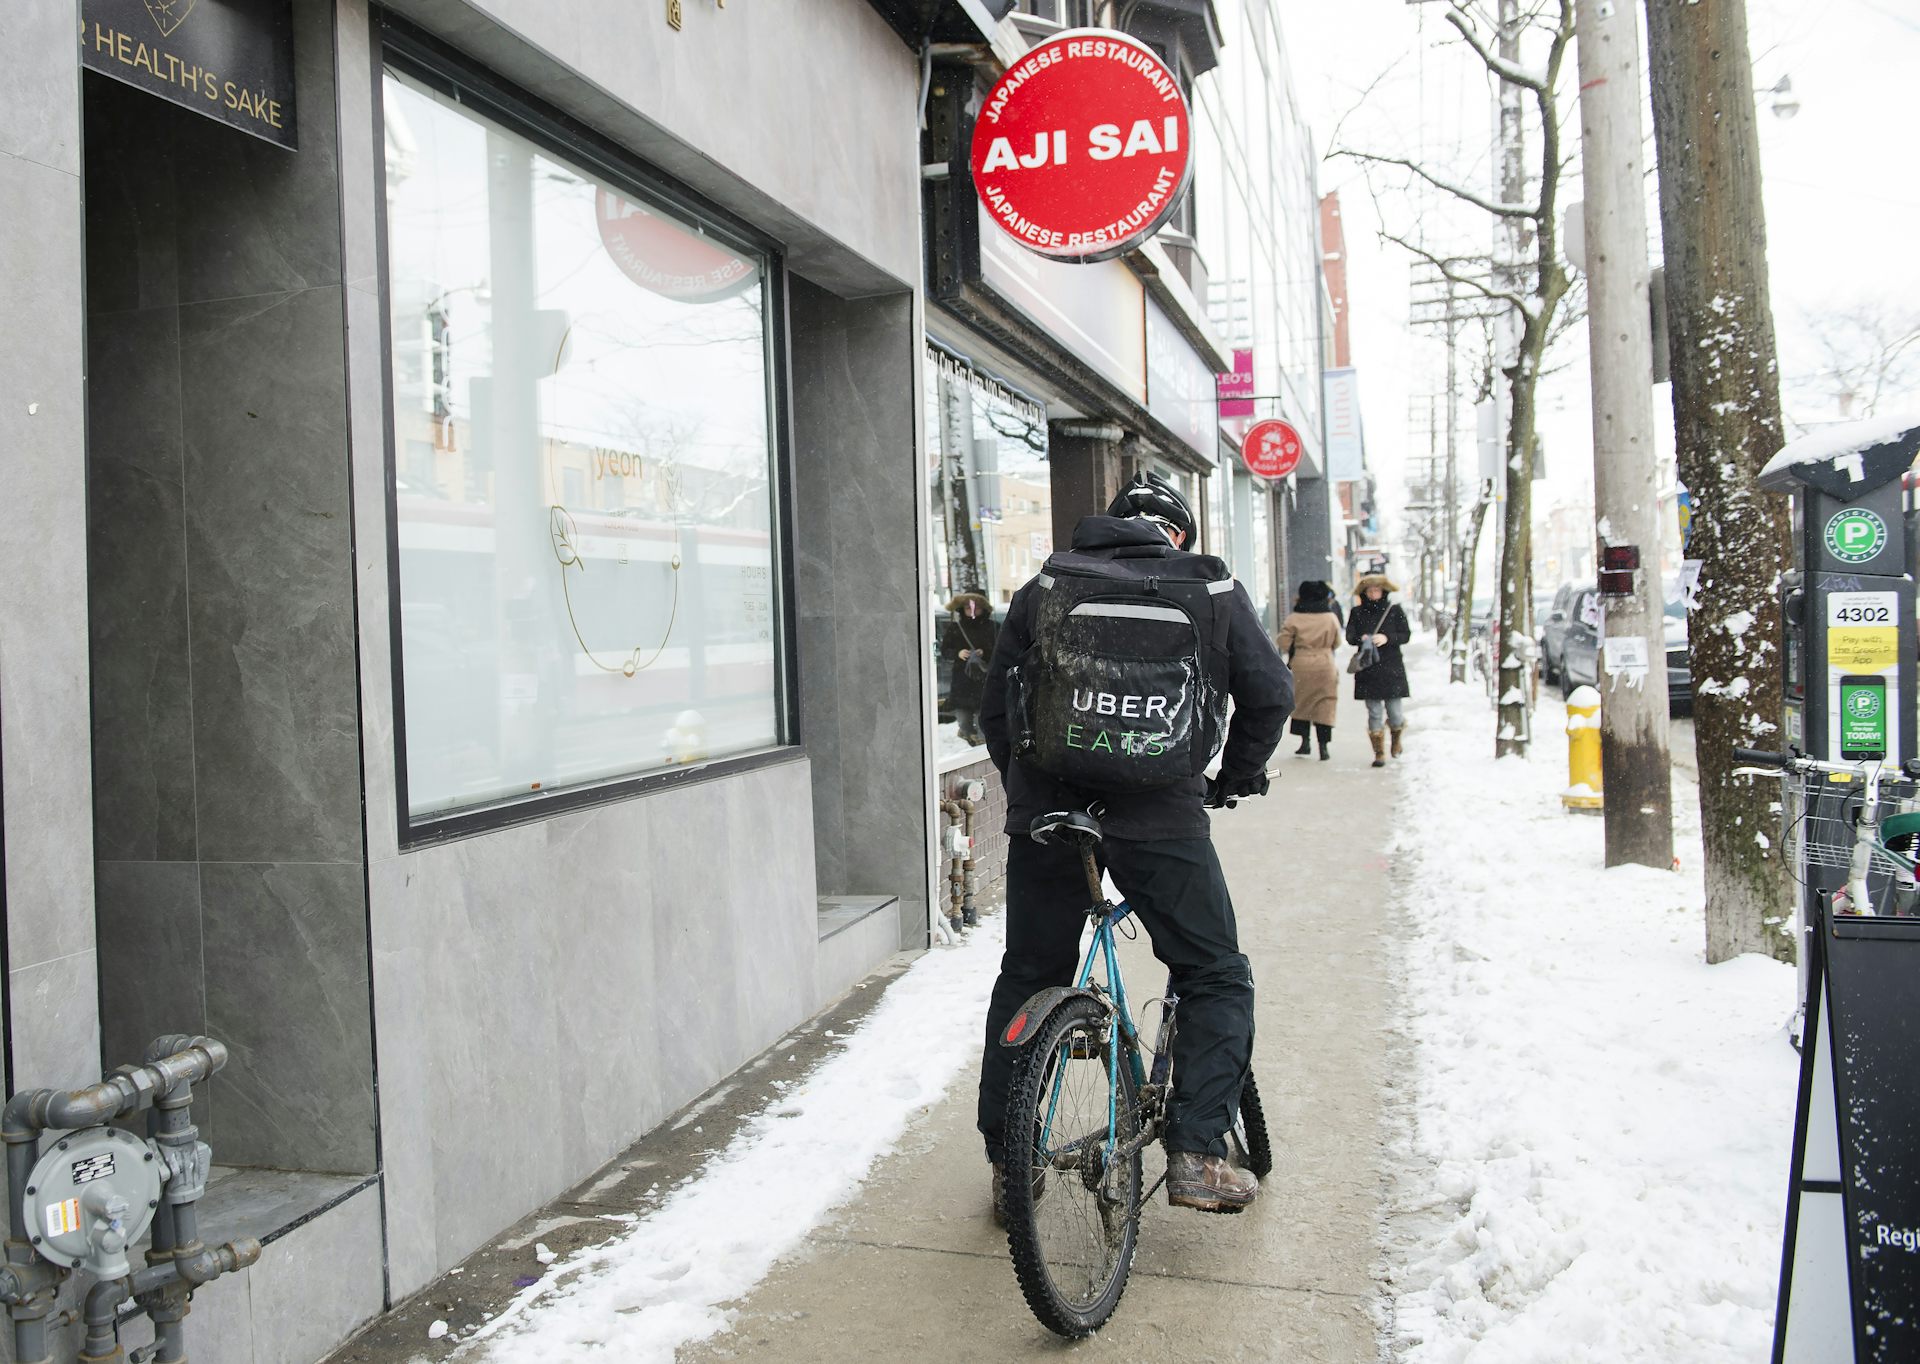 uber eats sign up bicycle